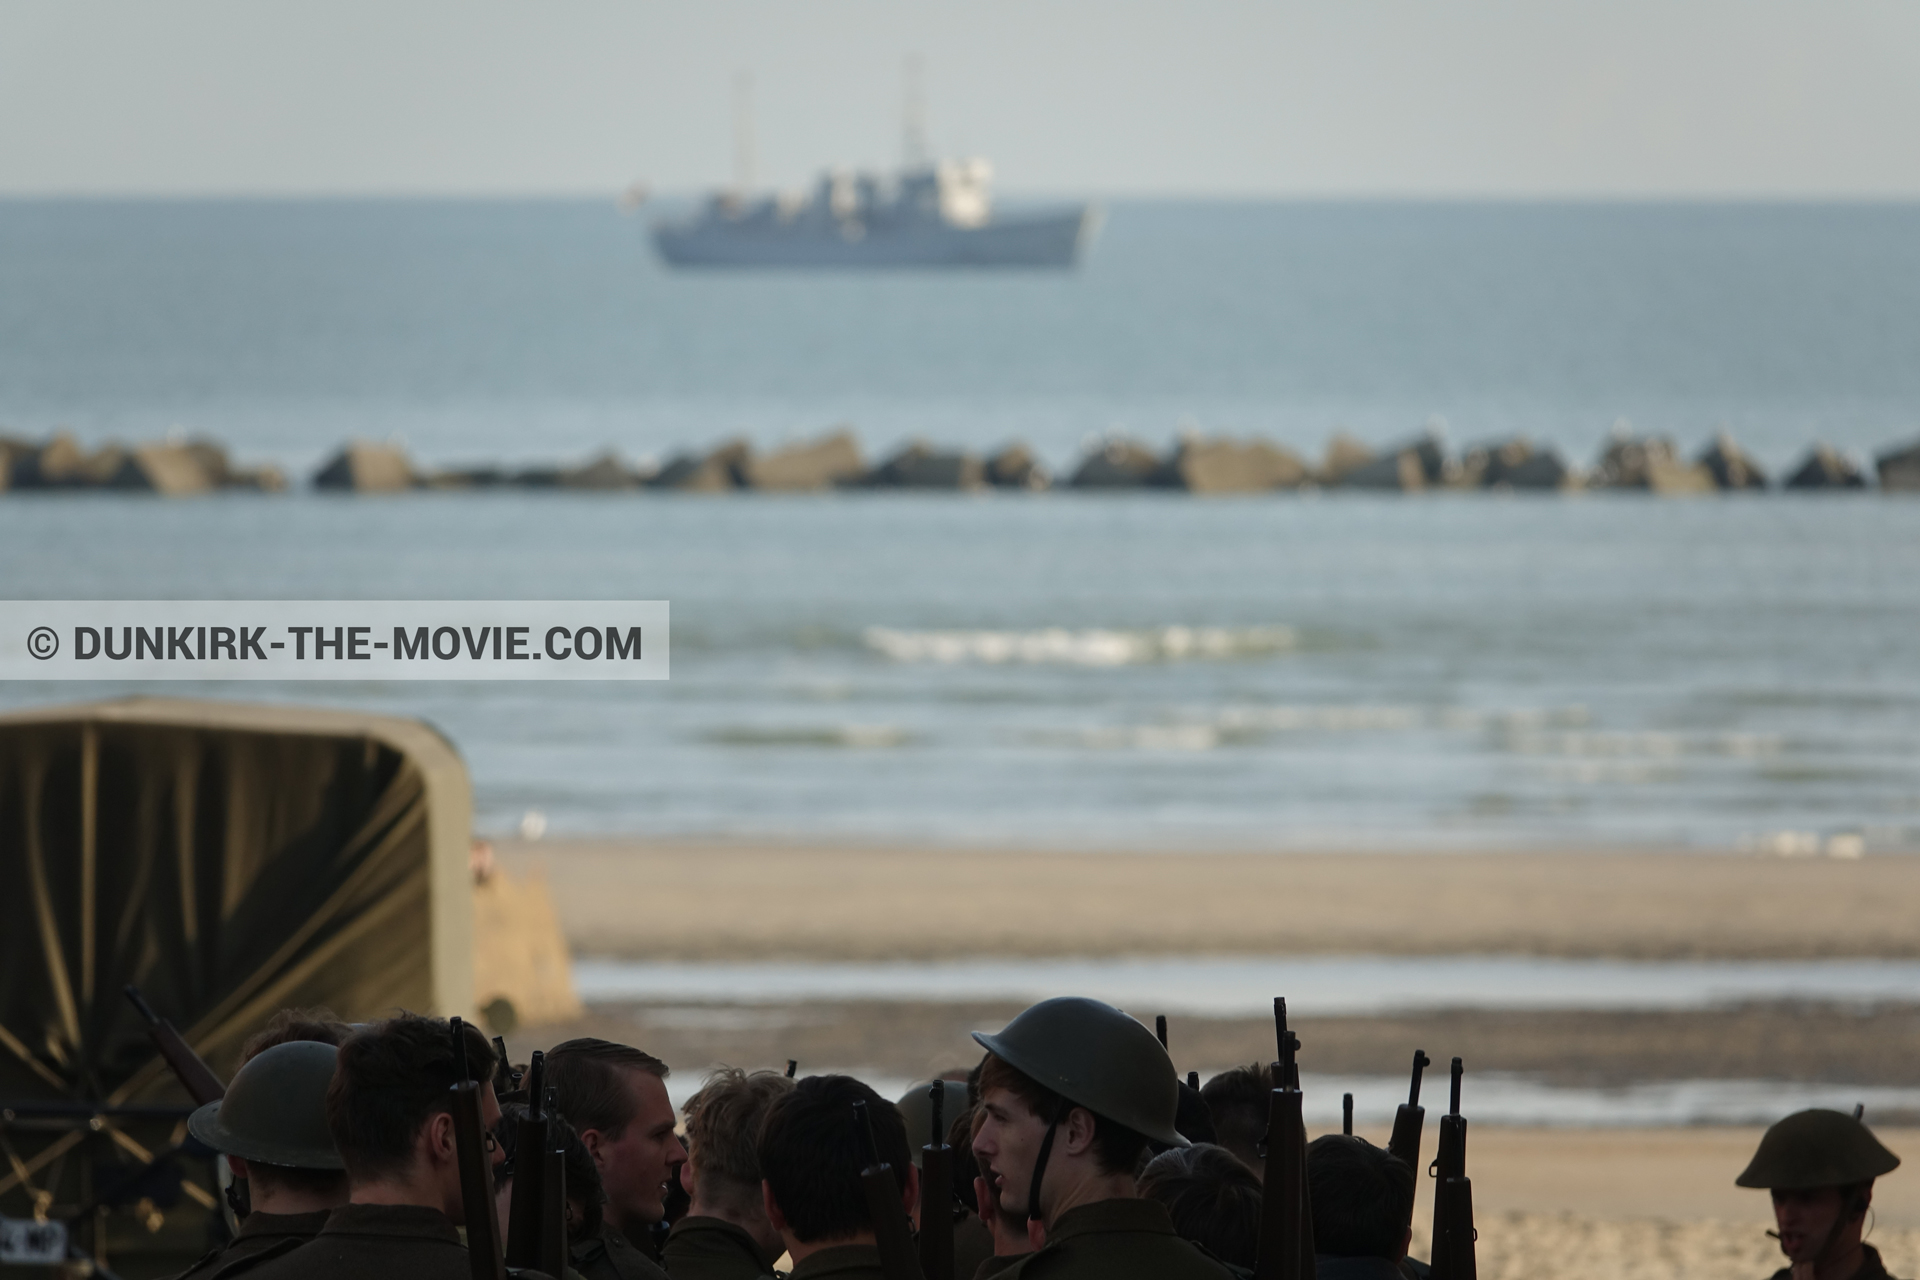 Picture with boat, truck, supernumeraries, H11 - MLV Castor, beach,  from behind the scene of the Dunkirk movie by Nolan